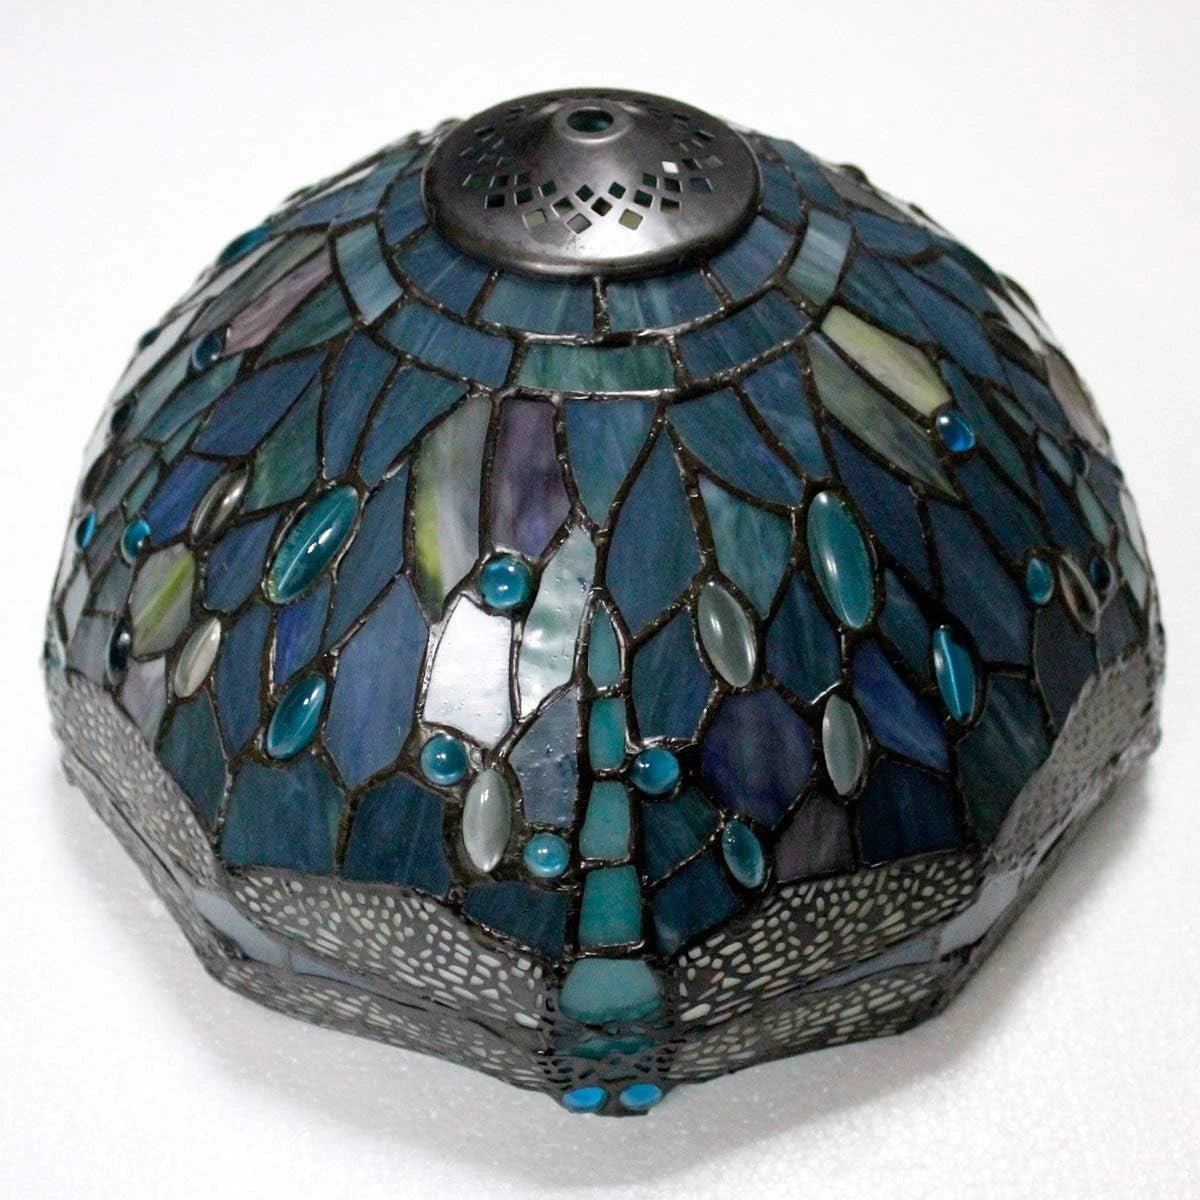 Ceiling Light Fixture Sea Blue Stained Glass